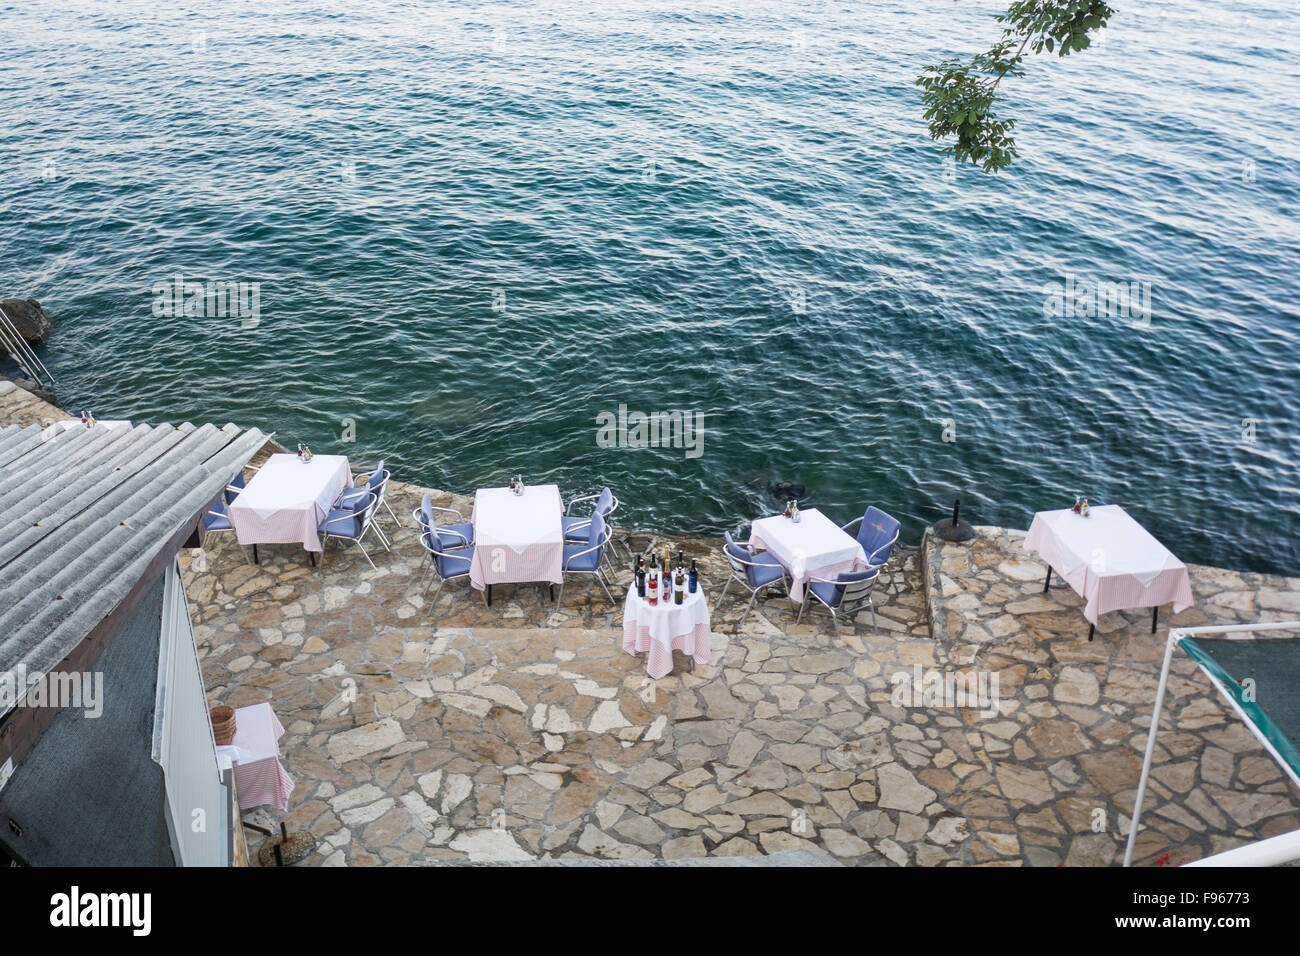 In addition to the parks, hotels and villas, one of Opatija's most prominent landmarks is the famous Lungomare seafront Stock Photo